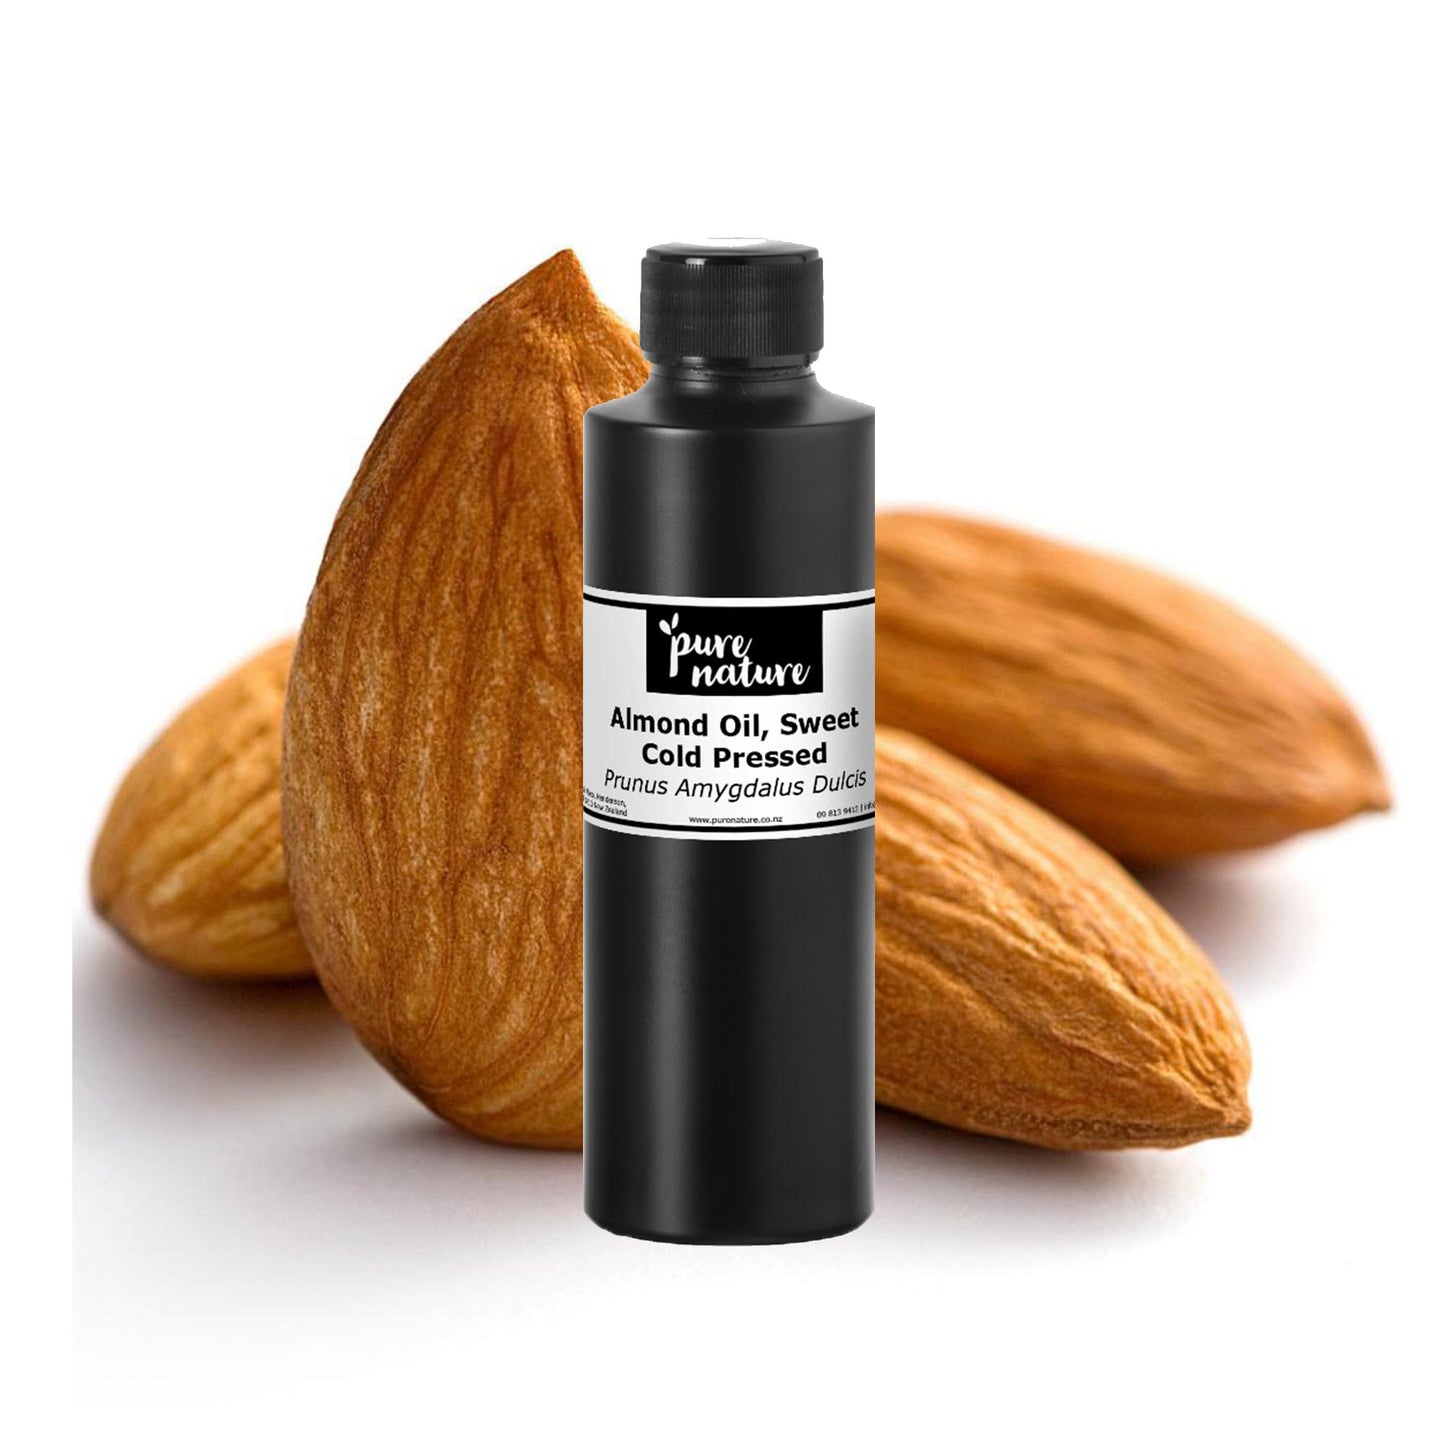 Almond Oil, Sweet - Cold Pressed